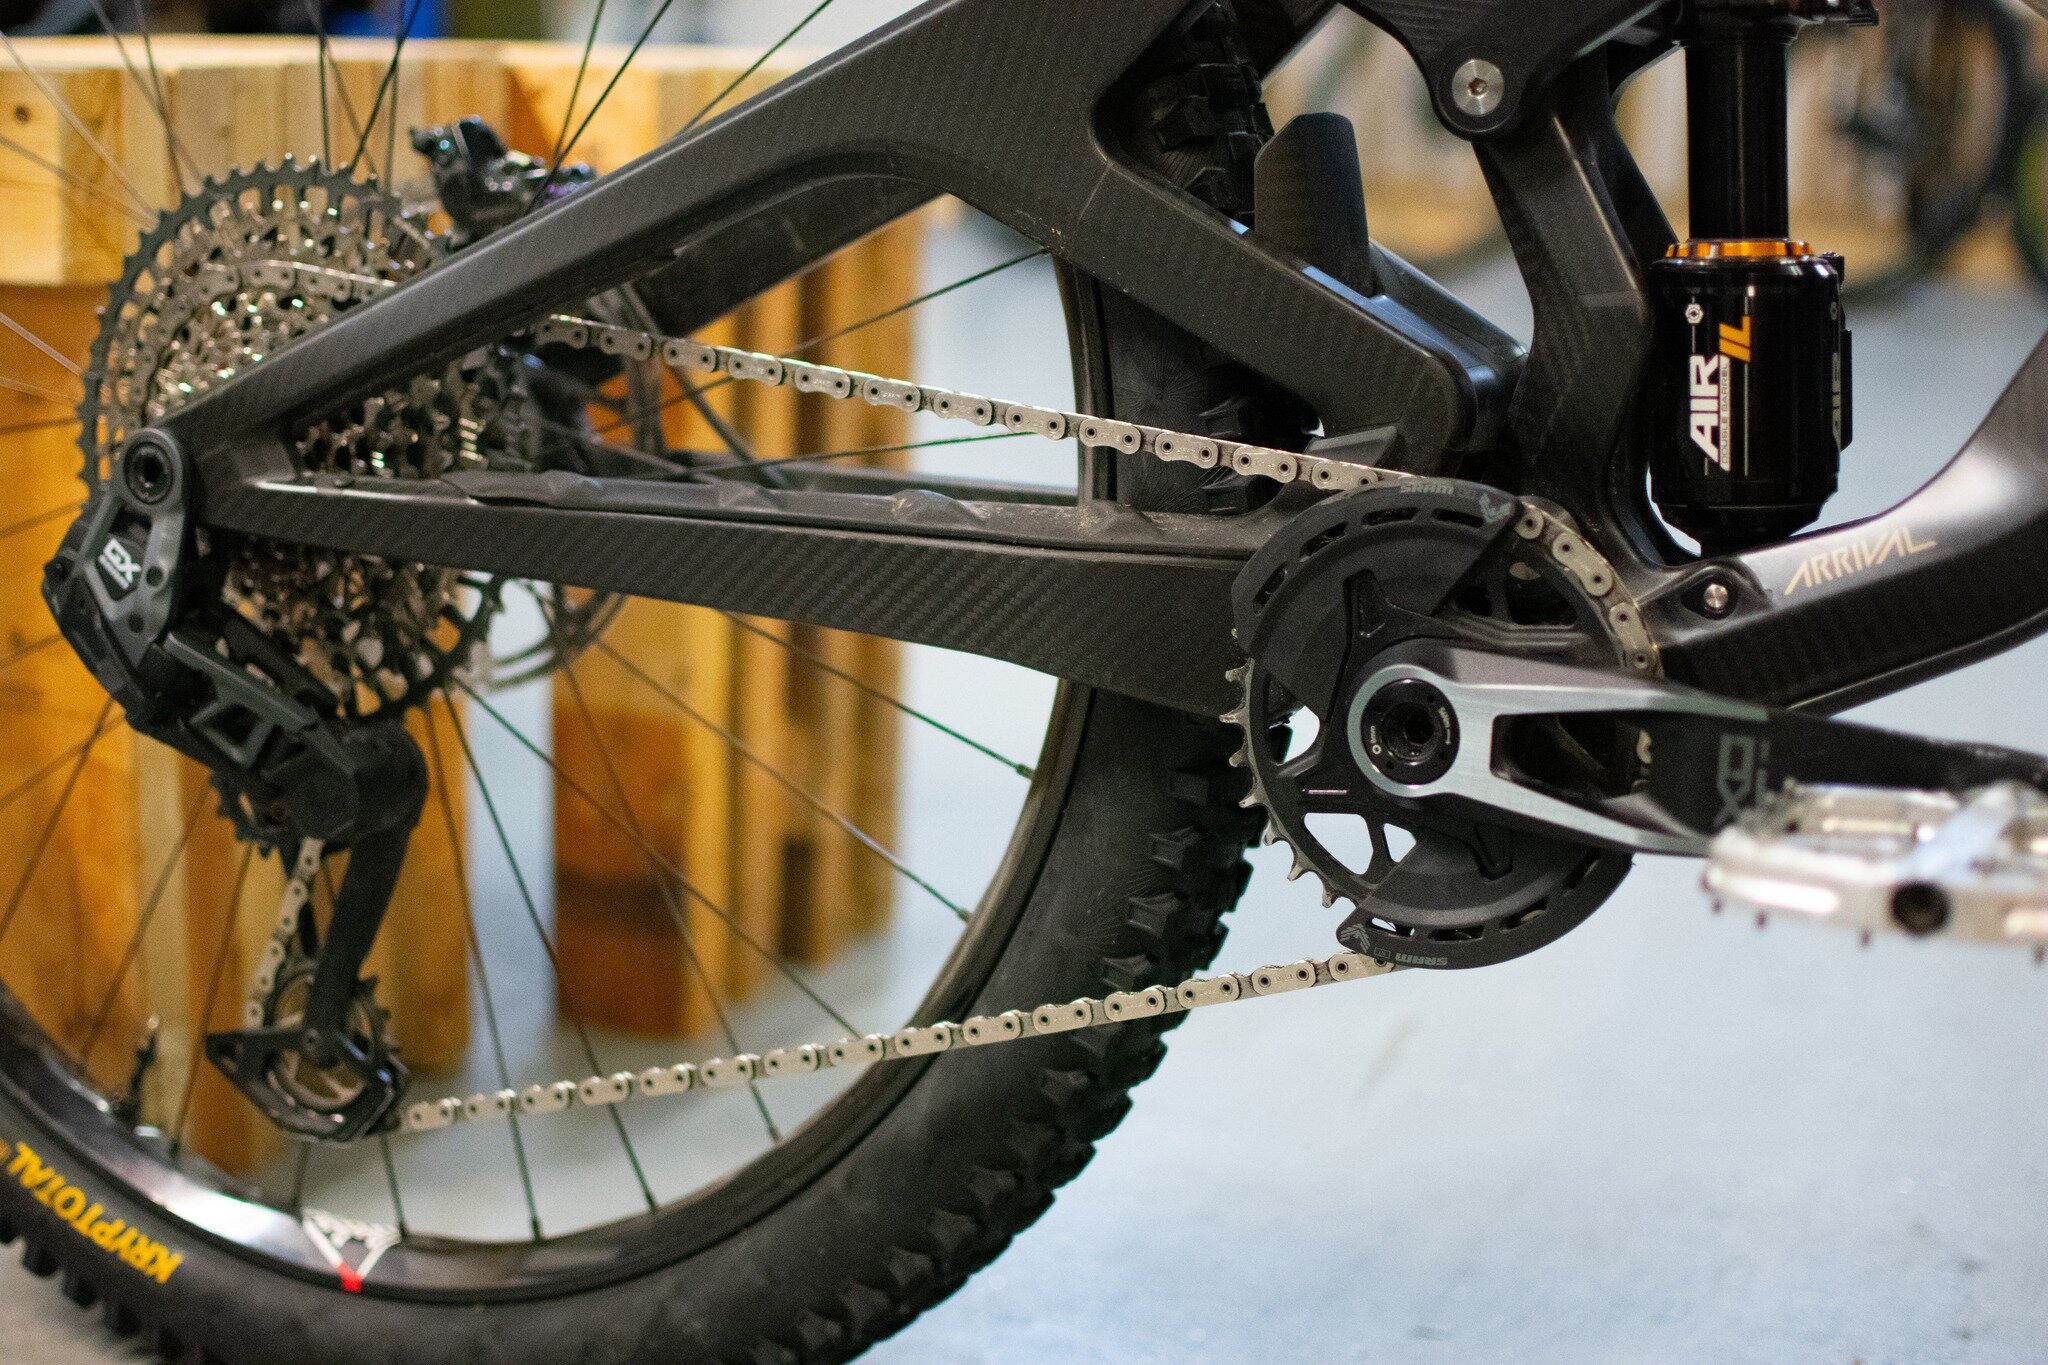 Alongside the new Mavens, Adam has been testing out SRAM's latest Transmission groupsets this winter. The GX groupset with XO cranks checks all the boxes for him - relatively affordable, tough, great shifting, and the cranks don't scuff up.
.
So far 